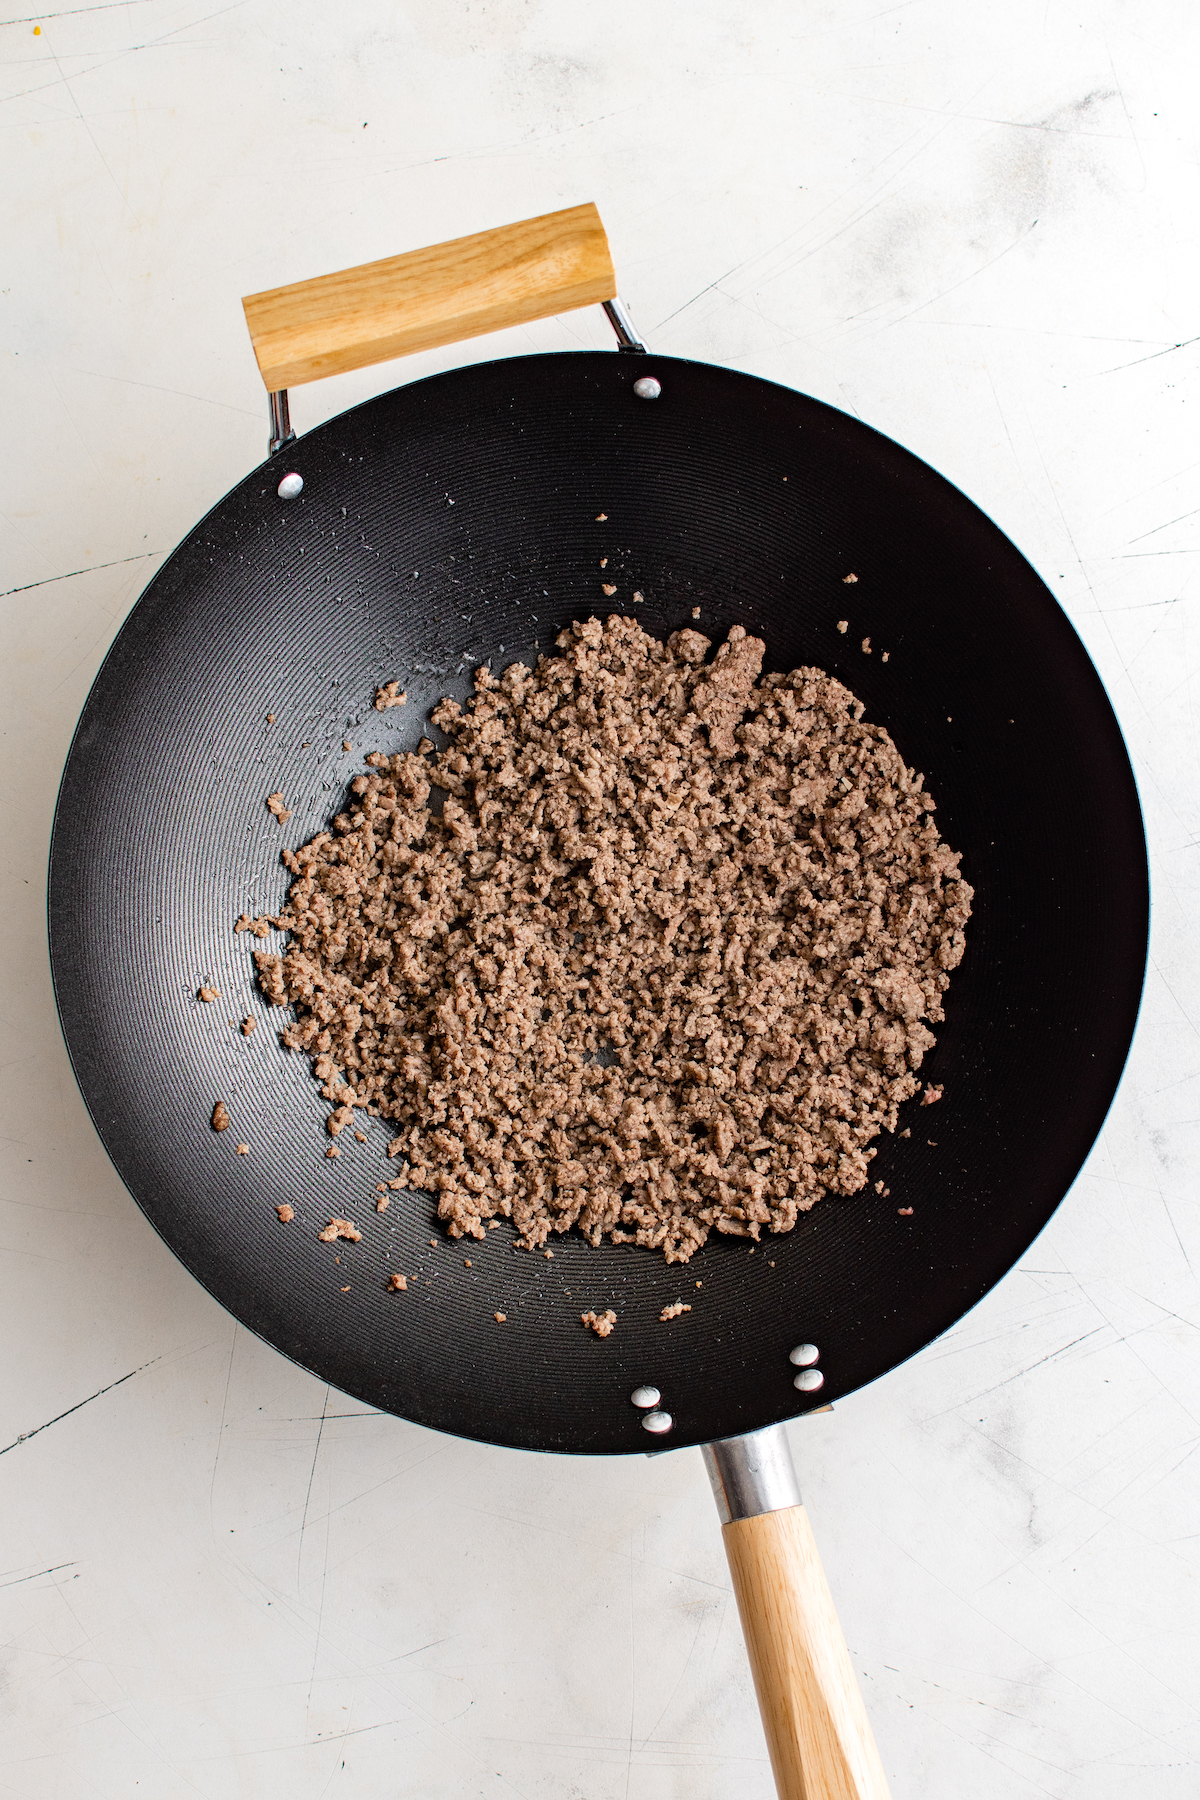 Ground beef cooking in a wok.